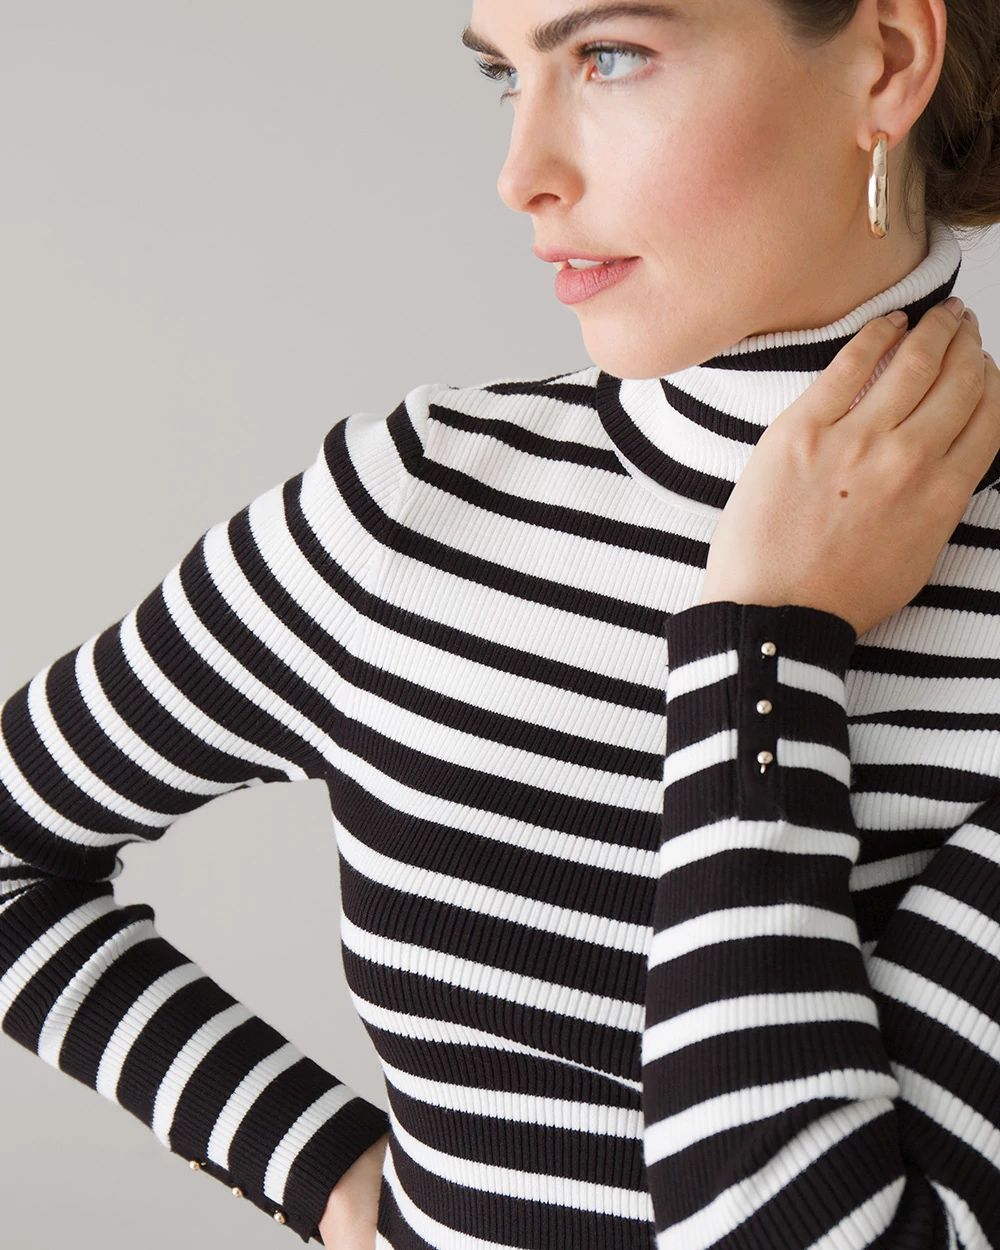 Long-Sleeve Ribbed Striped Turtleneck click to view larger image.